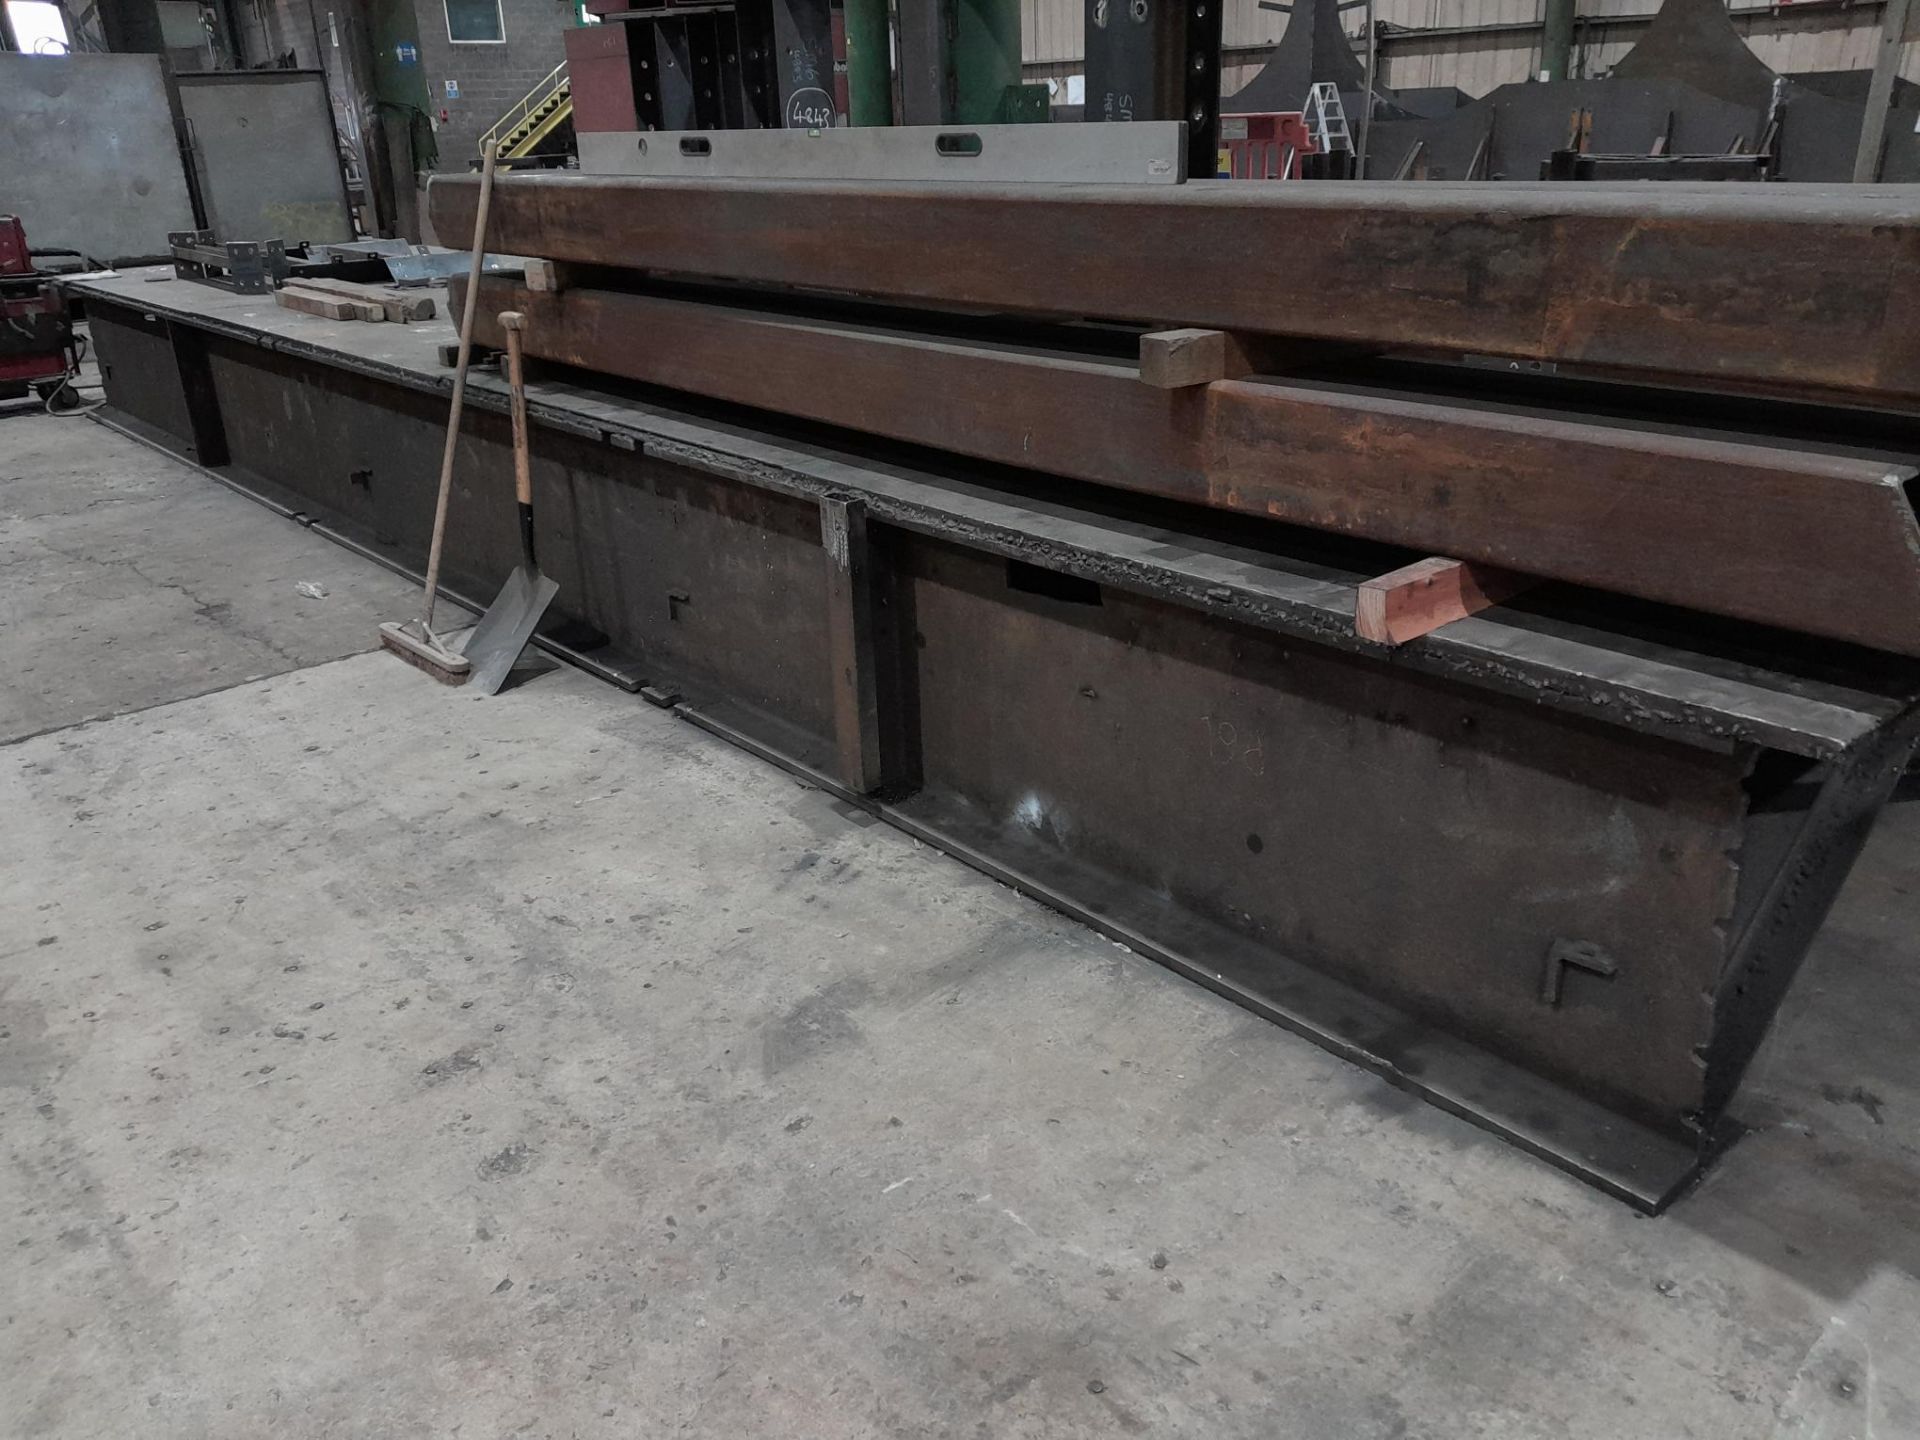 Very large fabricated work bench, approx 7m. Contents not included. - Image 2 of 3